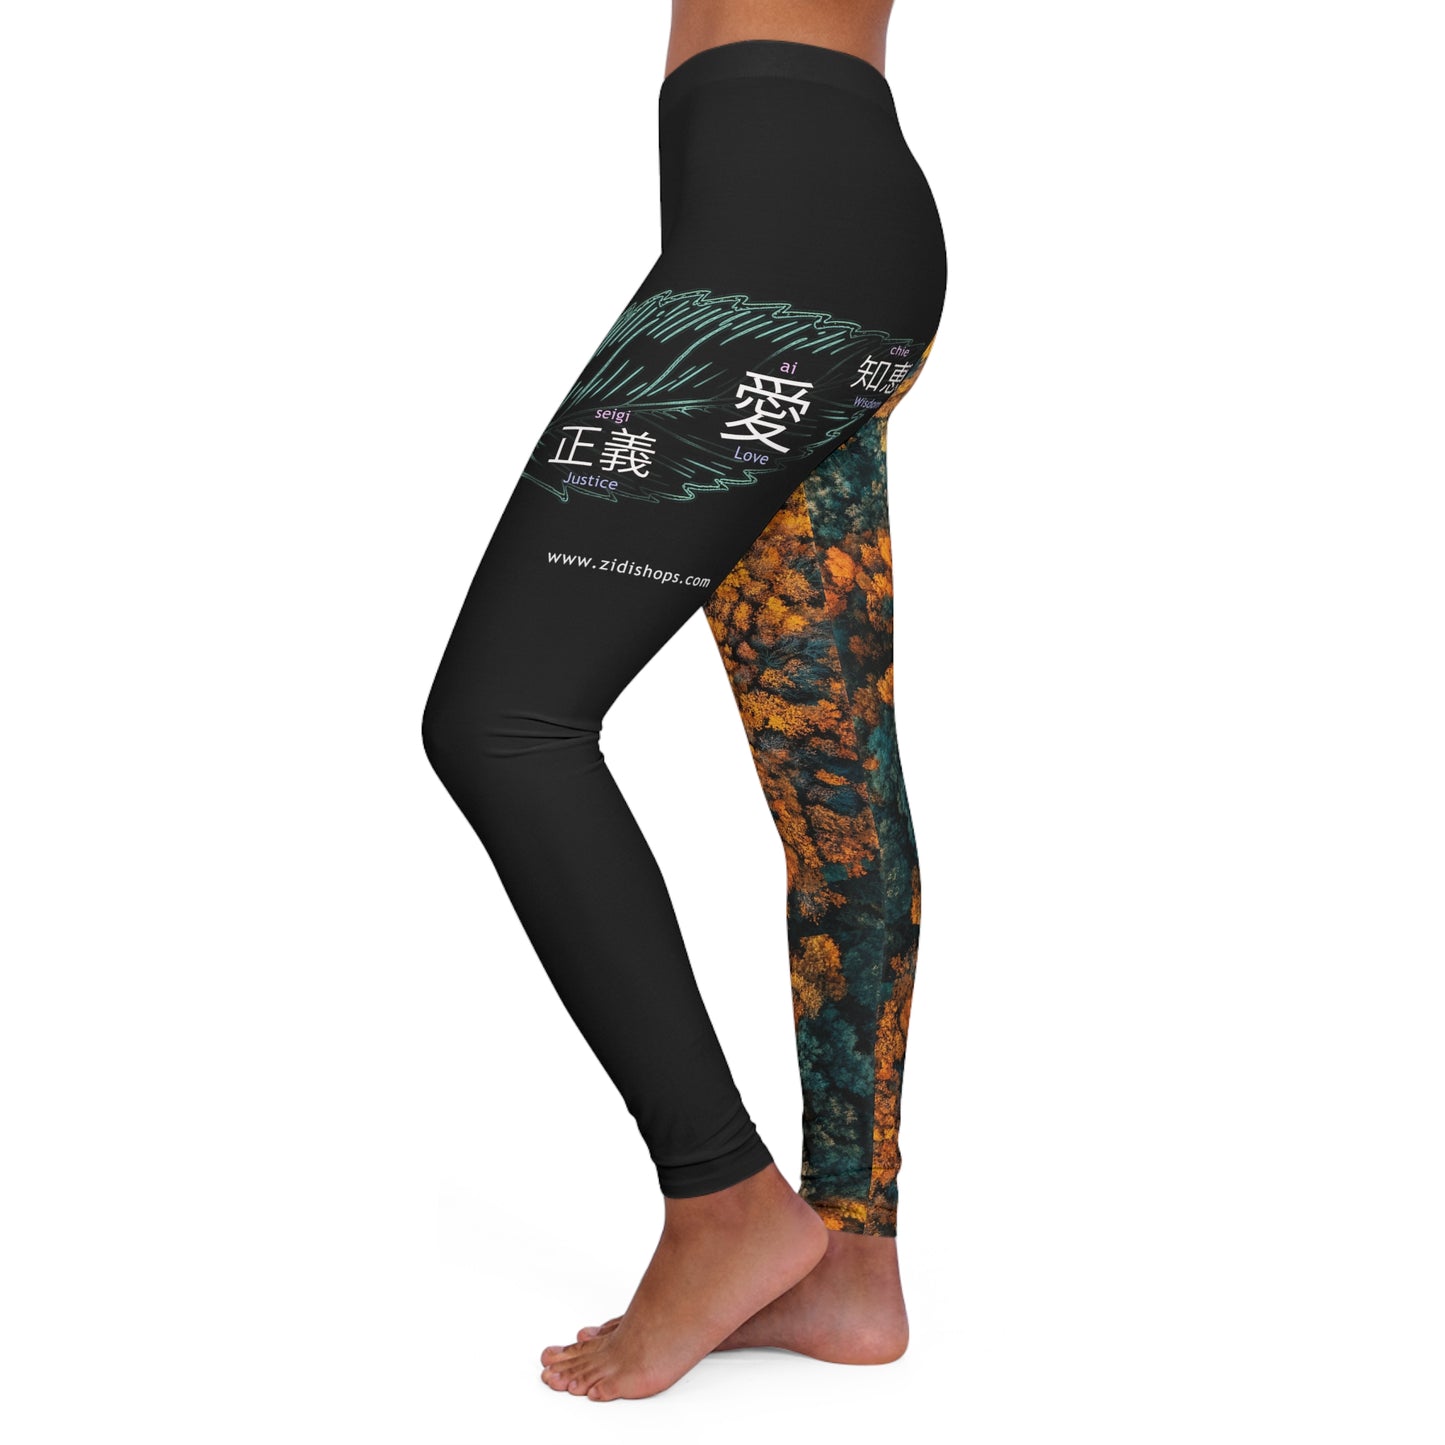 Women’s Spandex Leggings, Power, Love, wisdom, Justice, stretchy fabric that provides the perfect fit, Athleisure comfy and fun